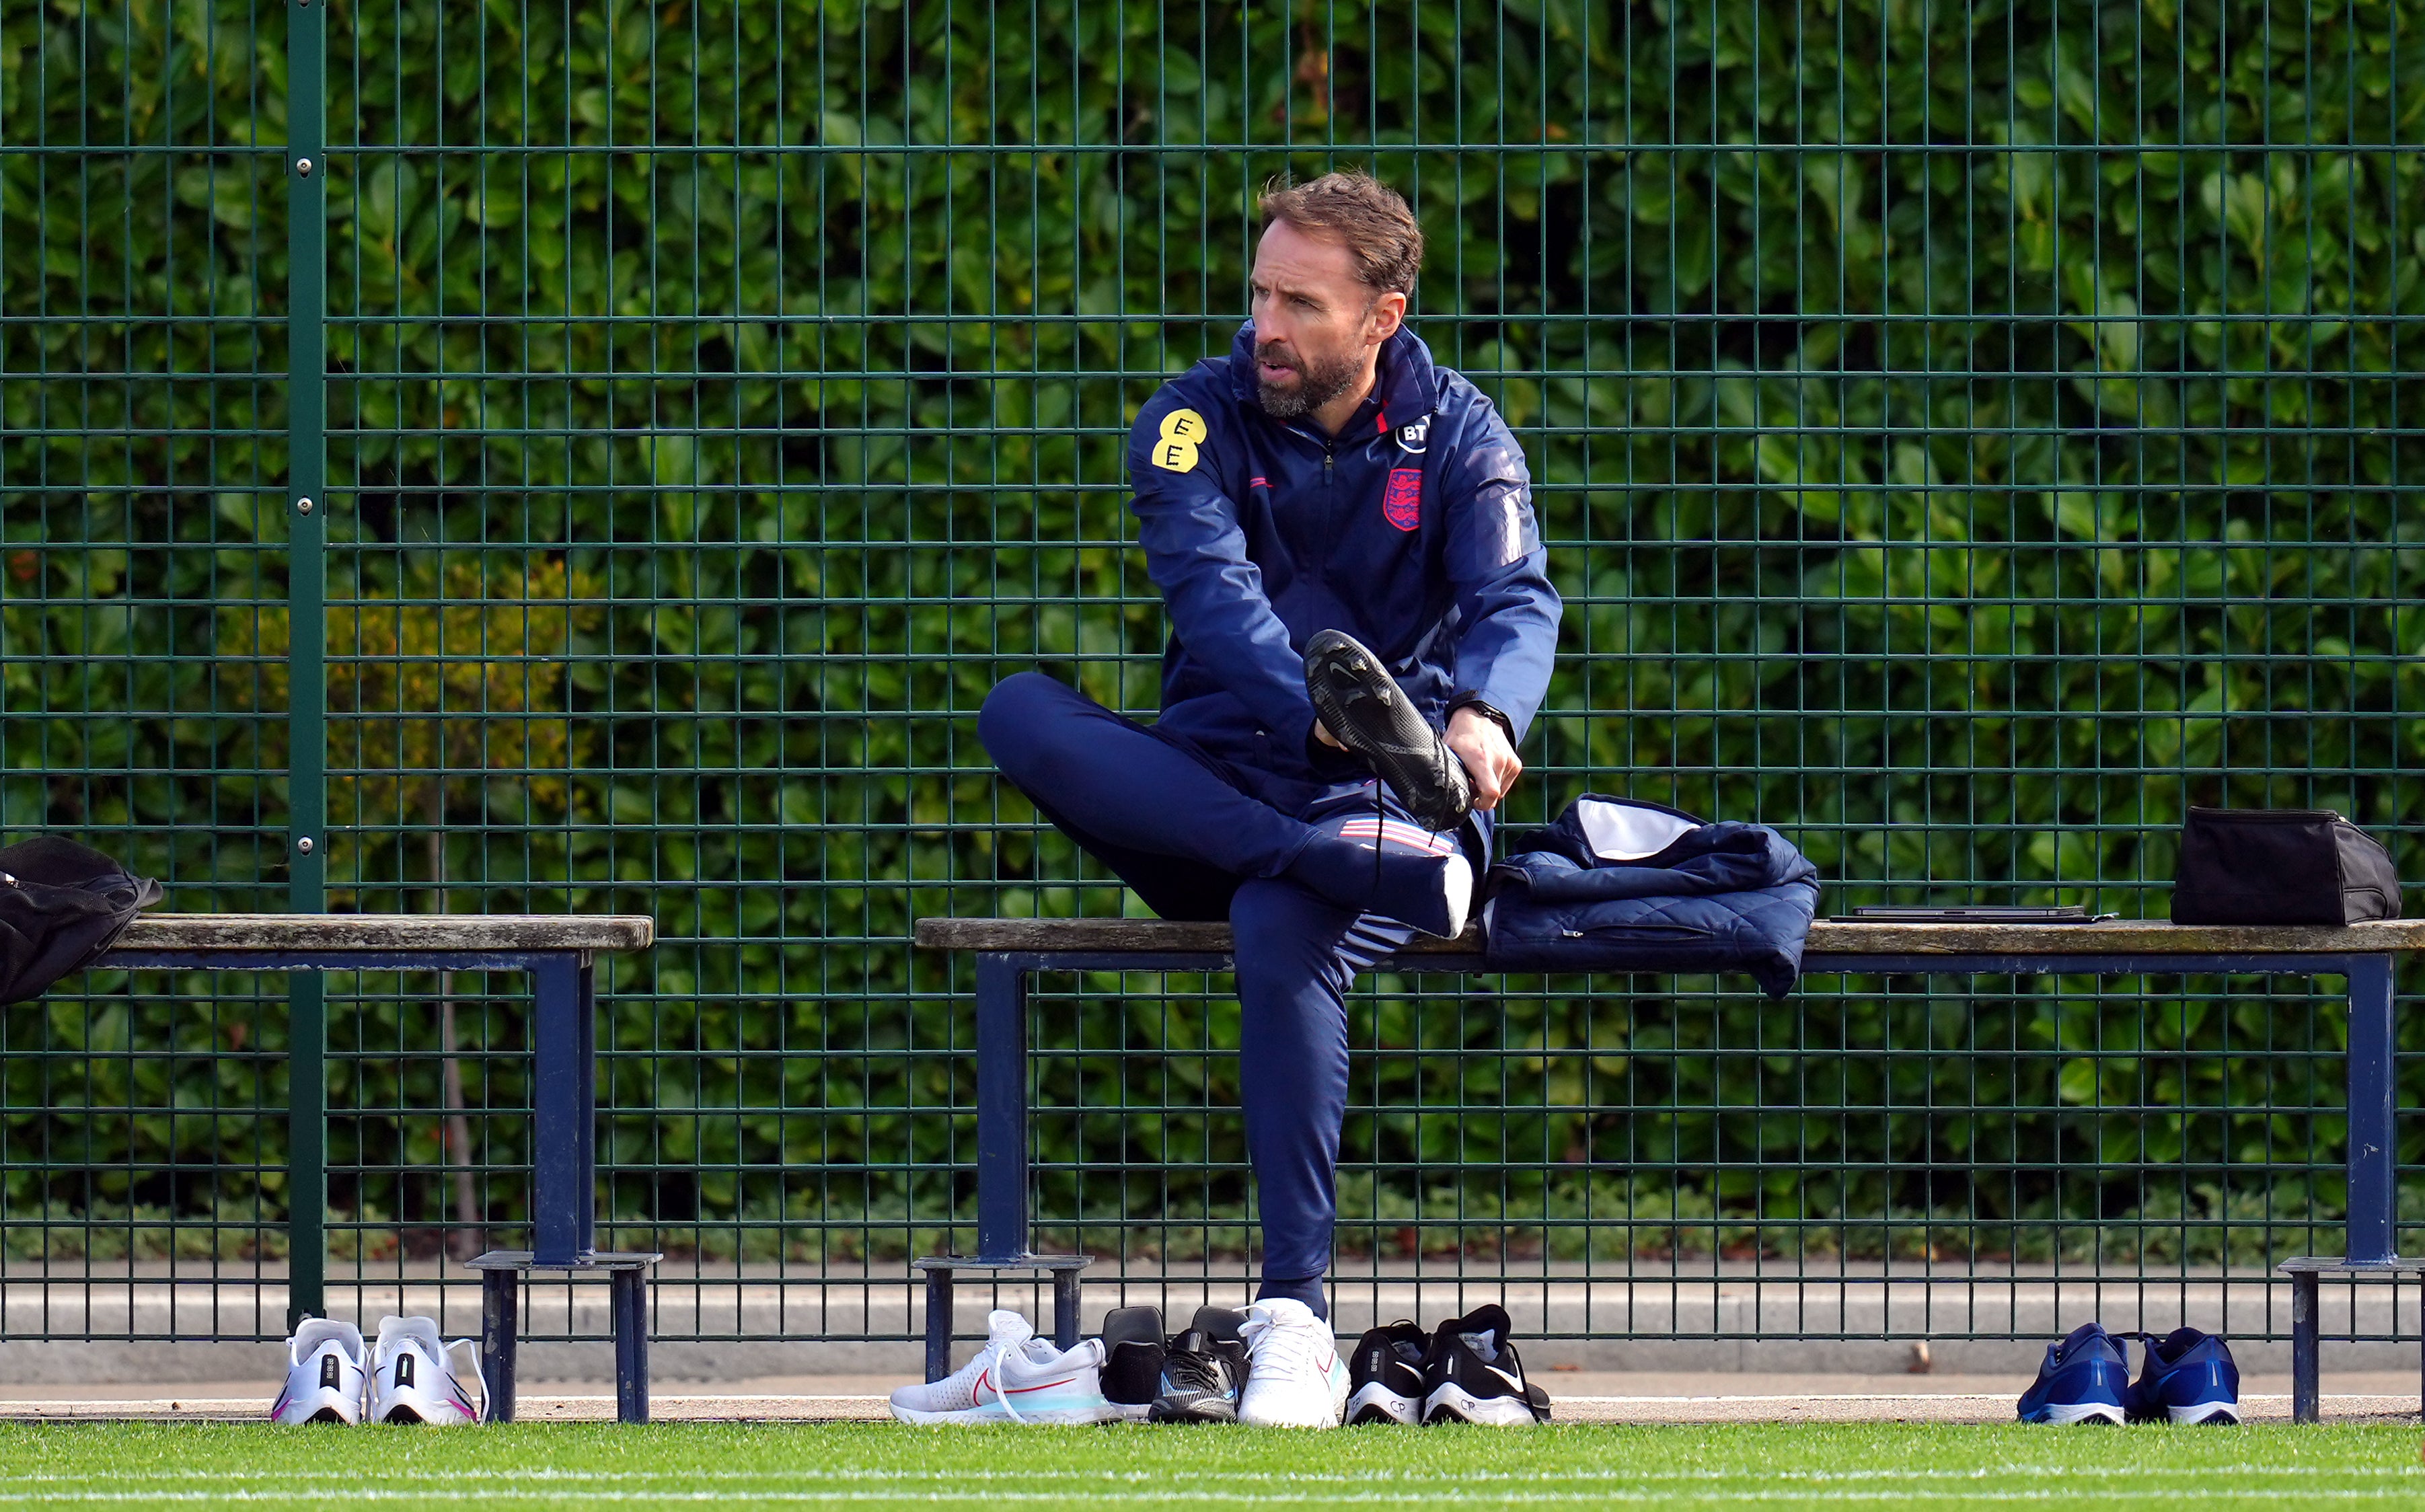 Gareth Southgate says picking each England squad is “very difficult” due to the quality at his disposal (John Walton/PA)